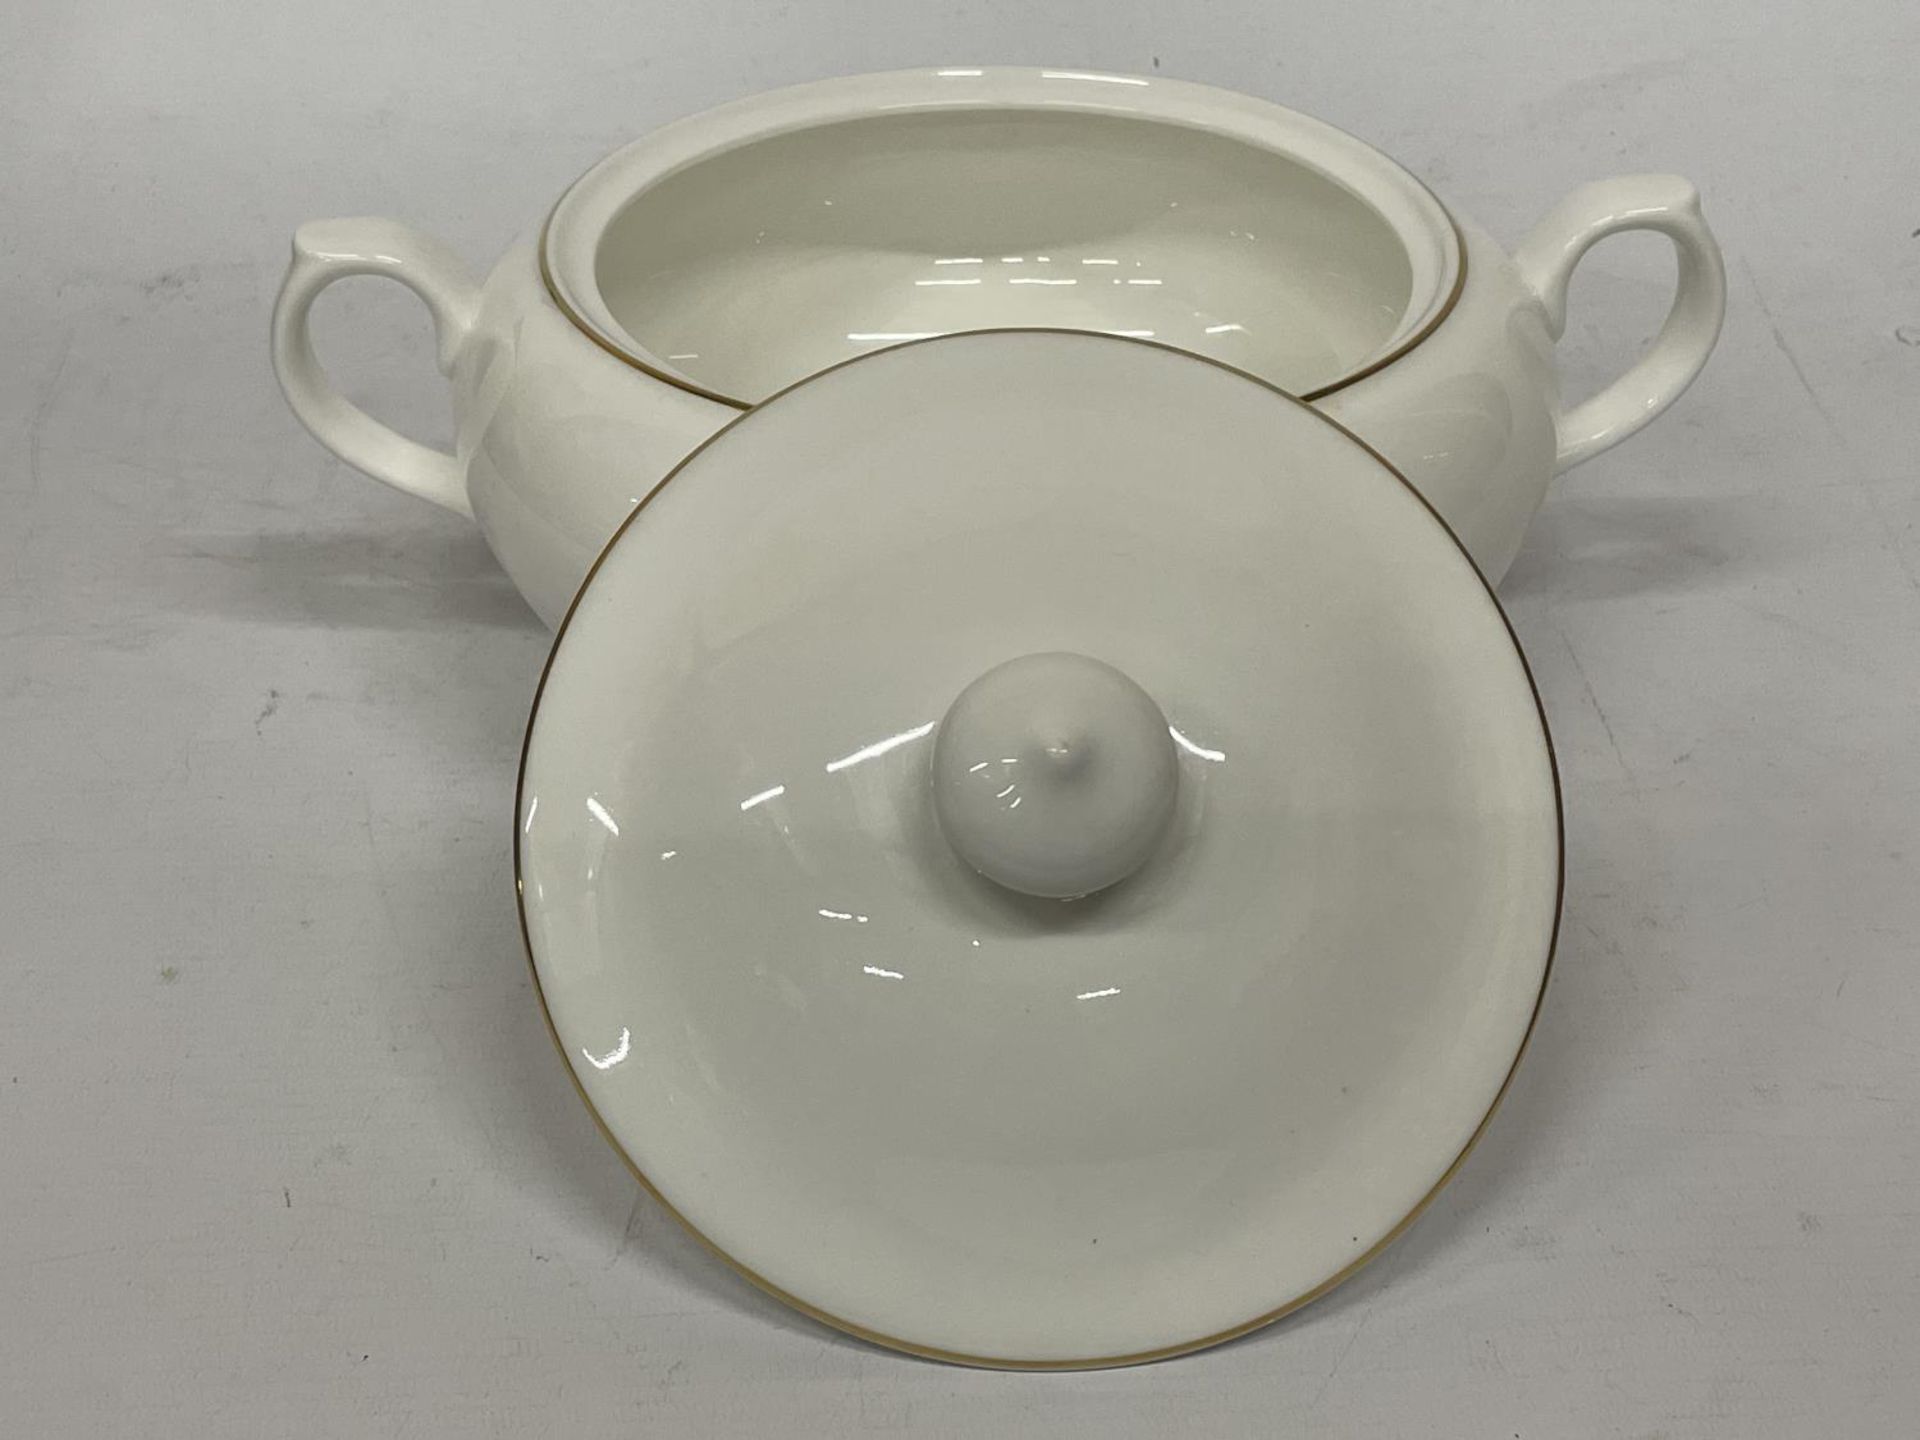 A RARE MINTON LIDDED TUREEN NO. 5306 MADE FOR THE AUSTRALIAN MARKET - Image 2 of 4